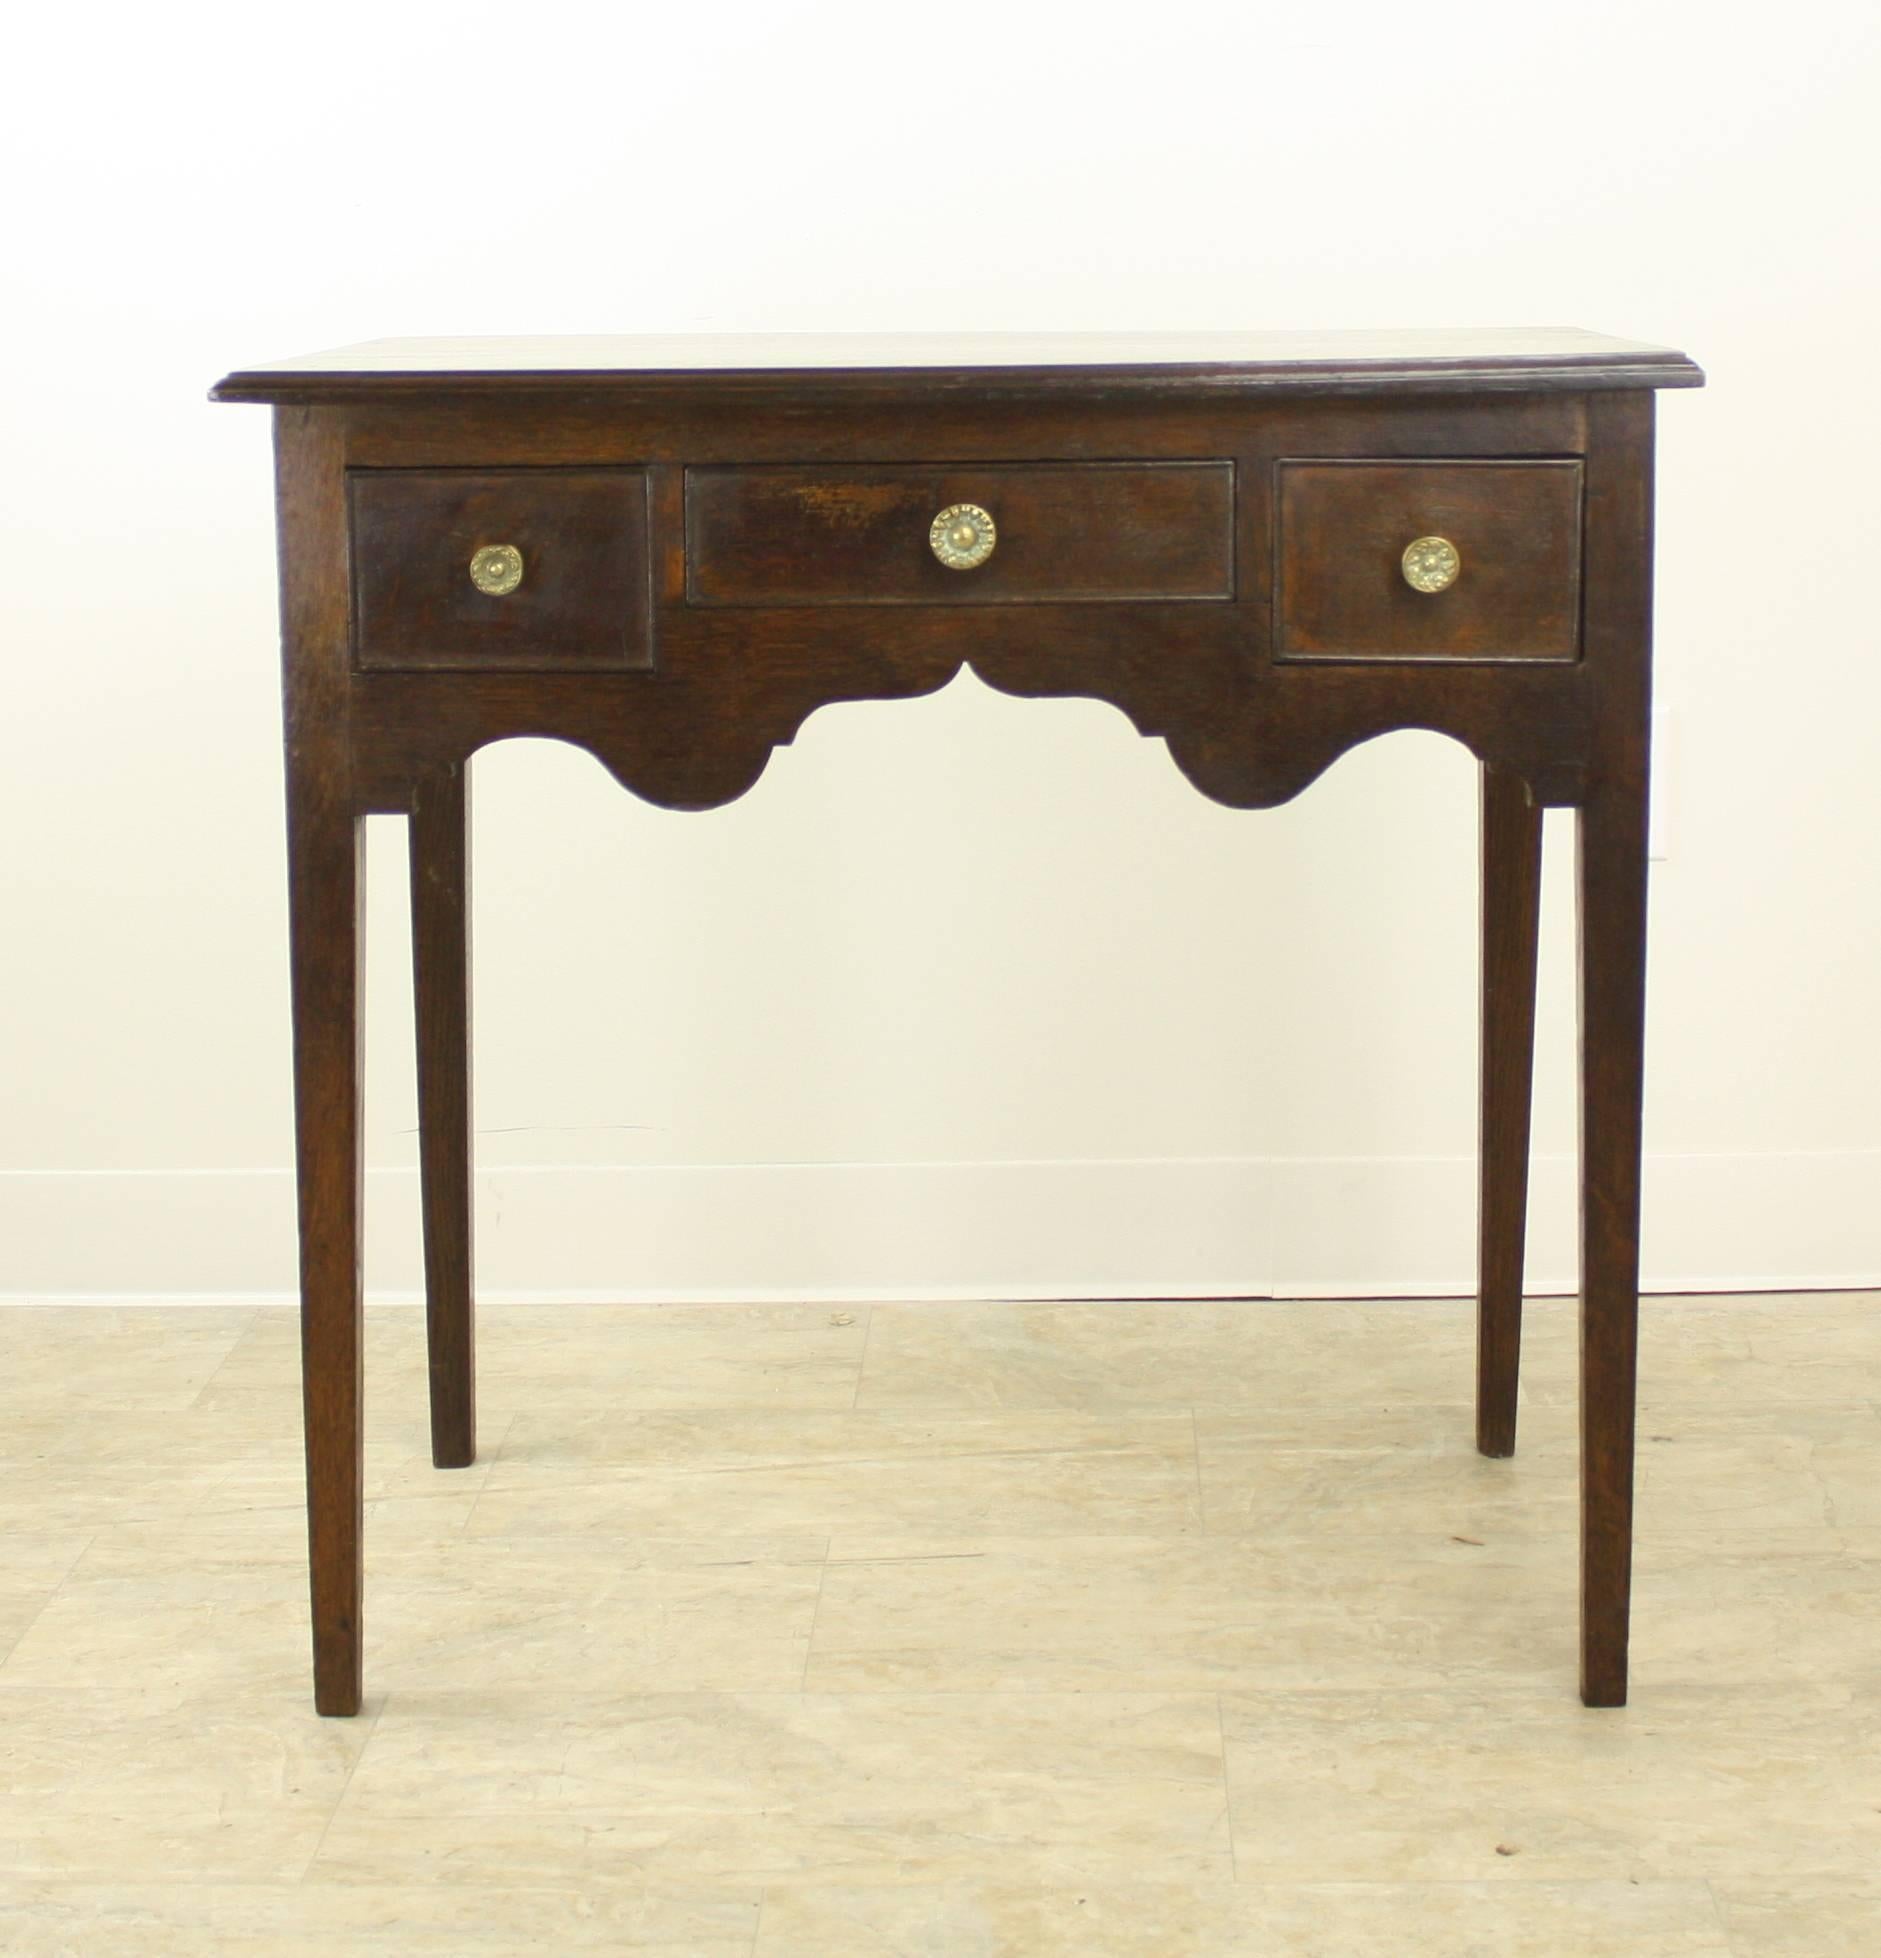 A stunning Classic period lowboy, a side table with lovely scalloped aprons, having three front drawers. The top has a very handsome molding around the edge, and the base is comprised of elegantly tapered slender legs. Color and patina are rich dark